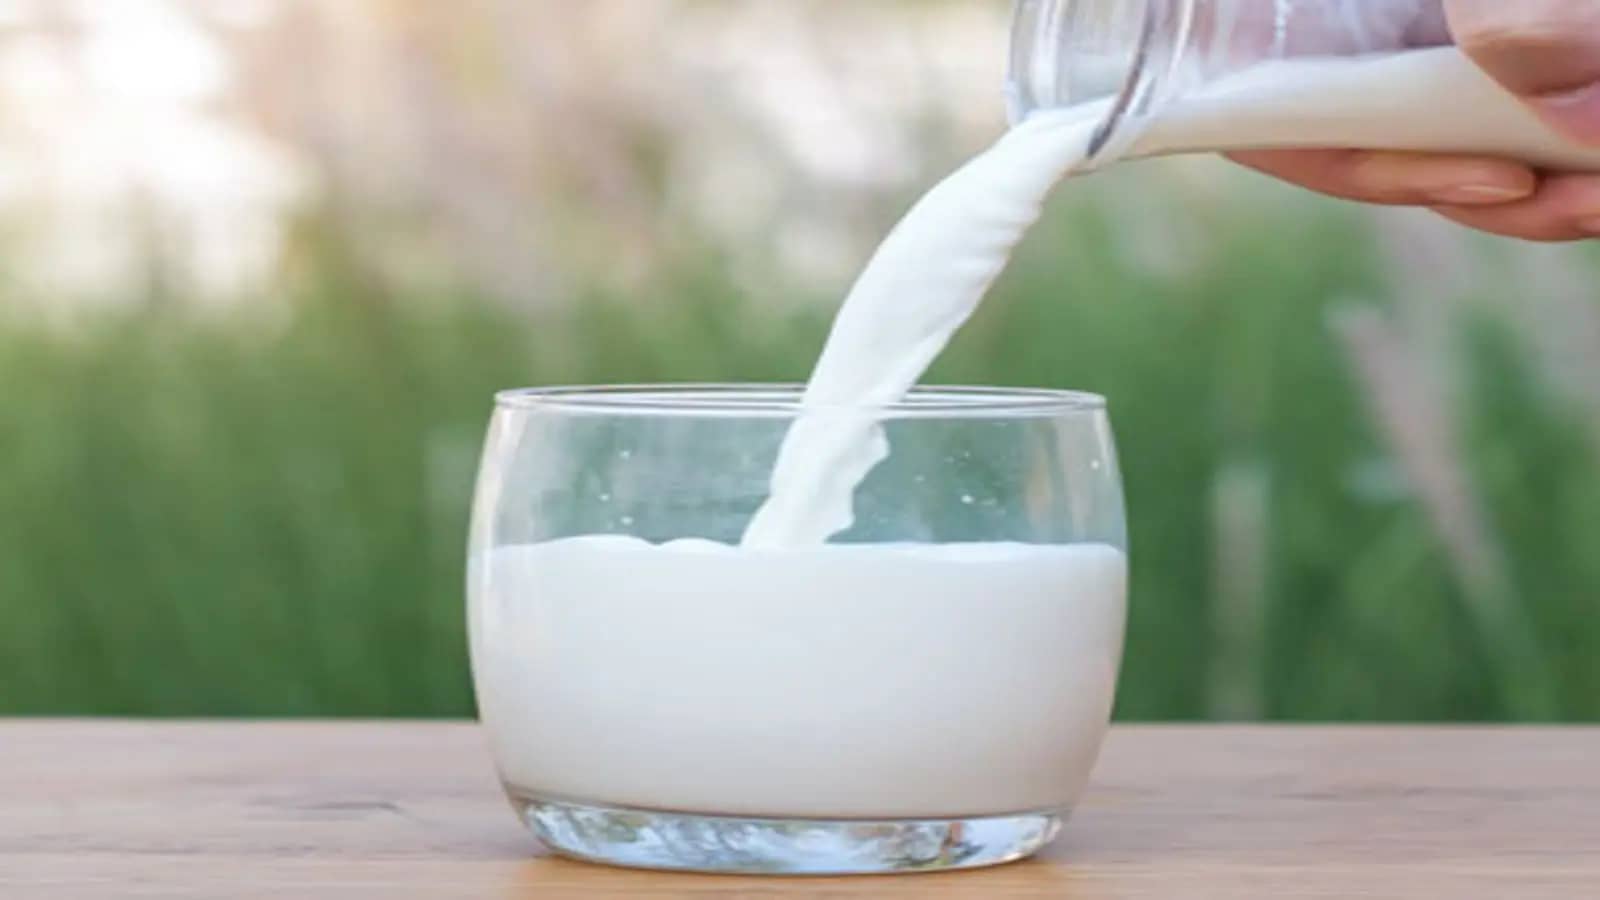 Social media influence drives young consumers into avoiding milk products, Arla study finds